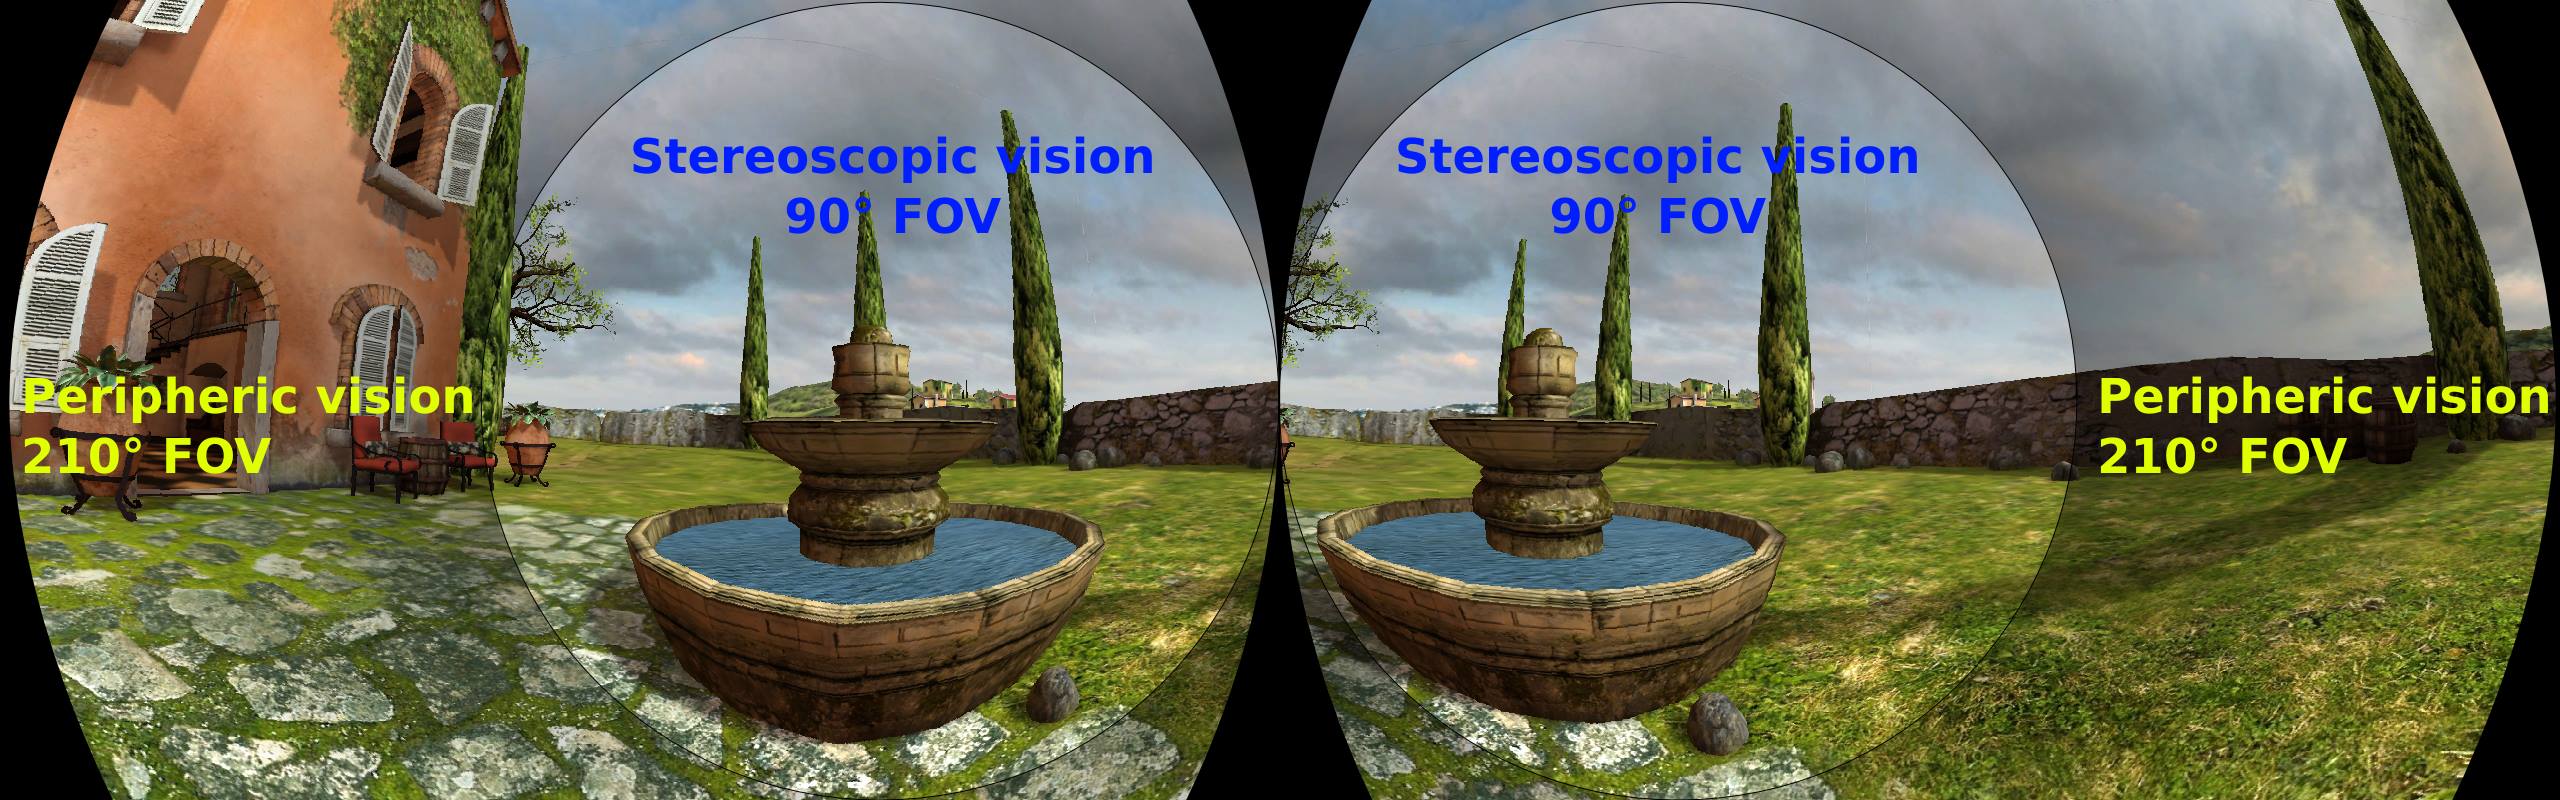 inftinieye-stereoscopic-filed-of-view-comparison-oculus-rift.jpg